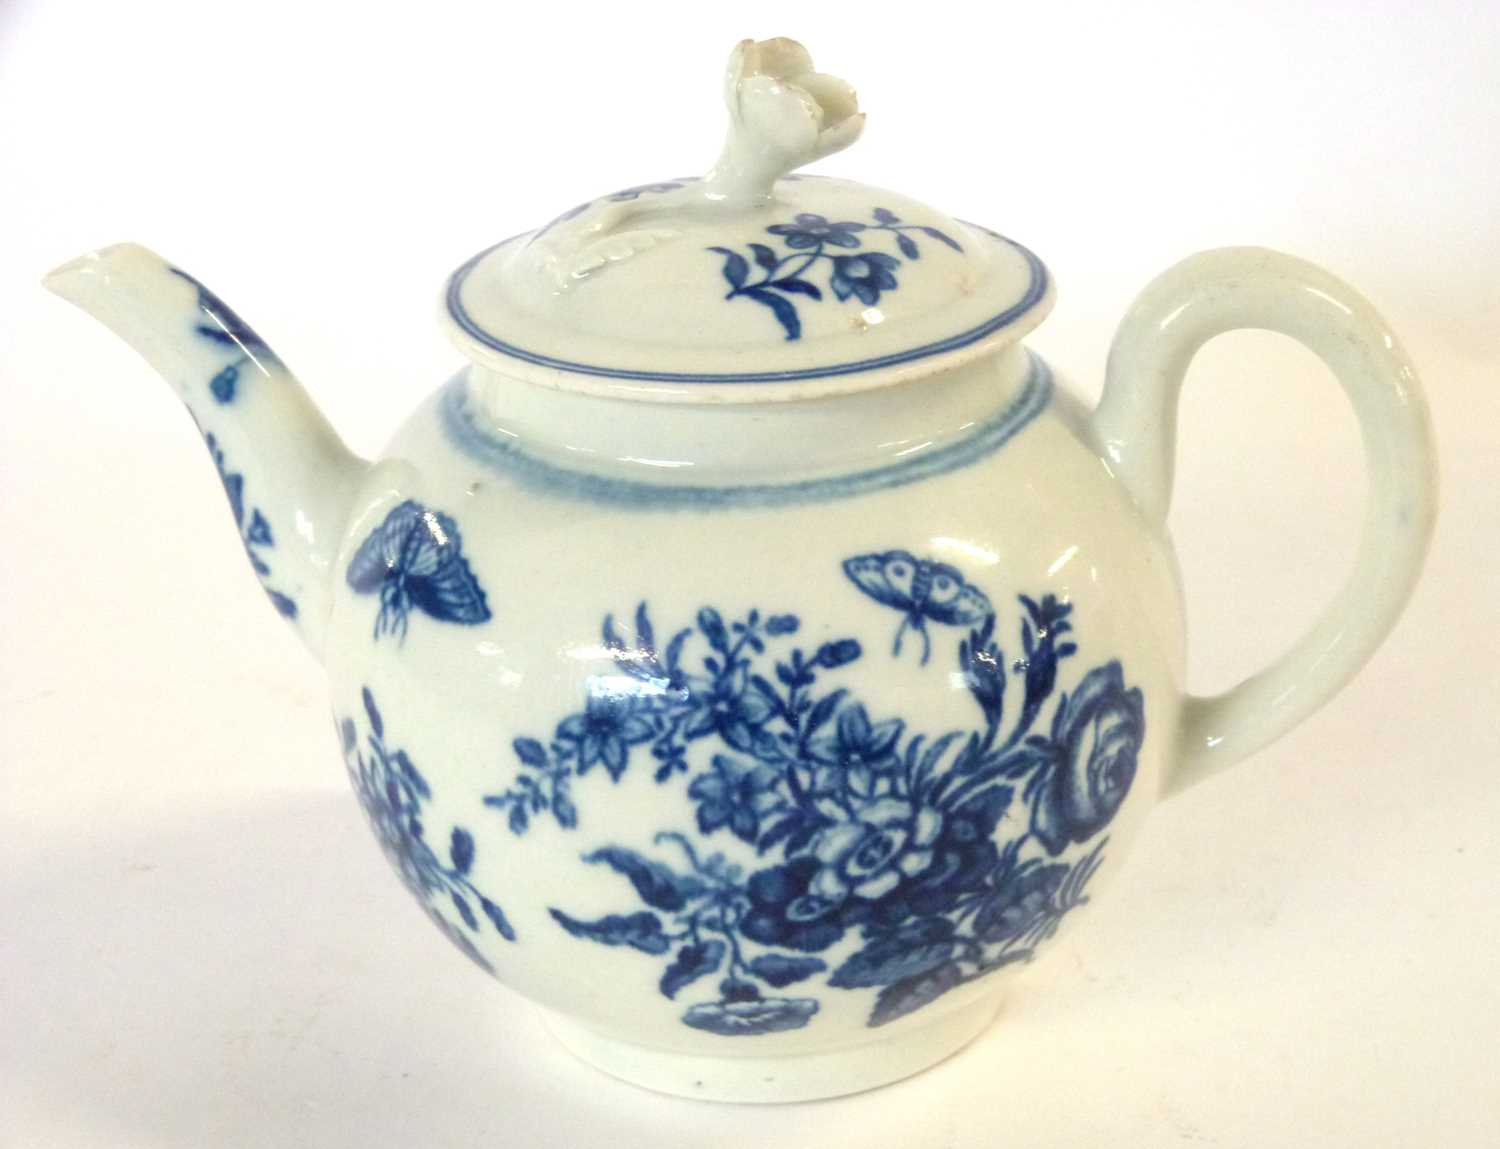 A Worcester porcelain teapot and cover, 18th Century with prints of flowers